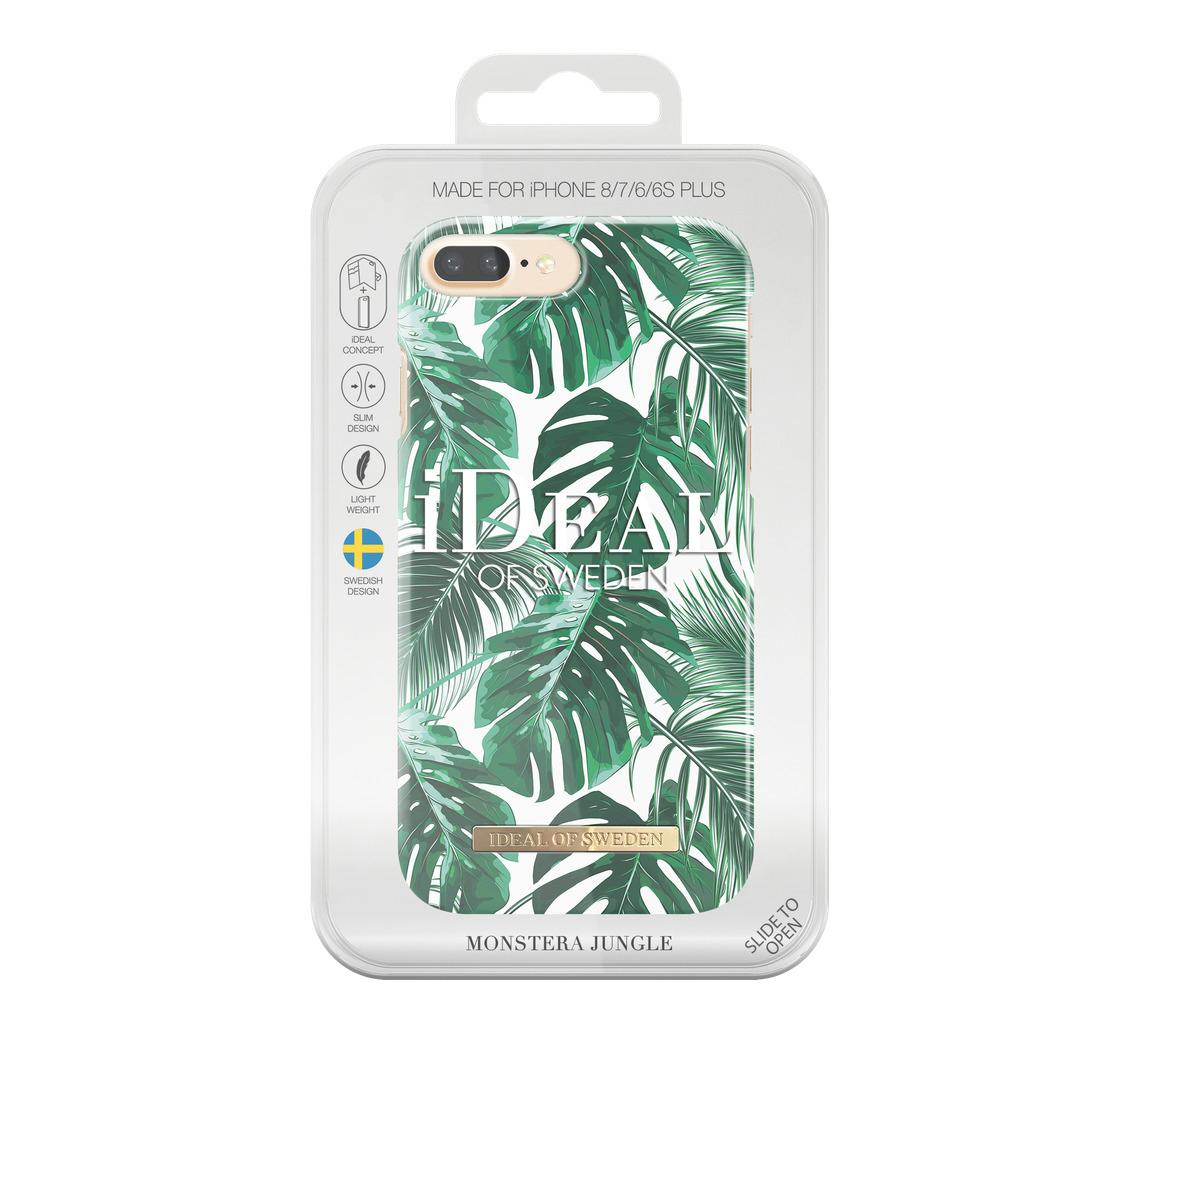 IDEAL OF SWEDEN Fashion, Jungle Backcover, 6 7 Plus, 8 Apple, ,iPhone iPhone Plus iPhone Monstera Plus